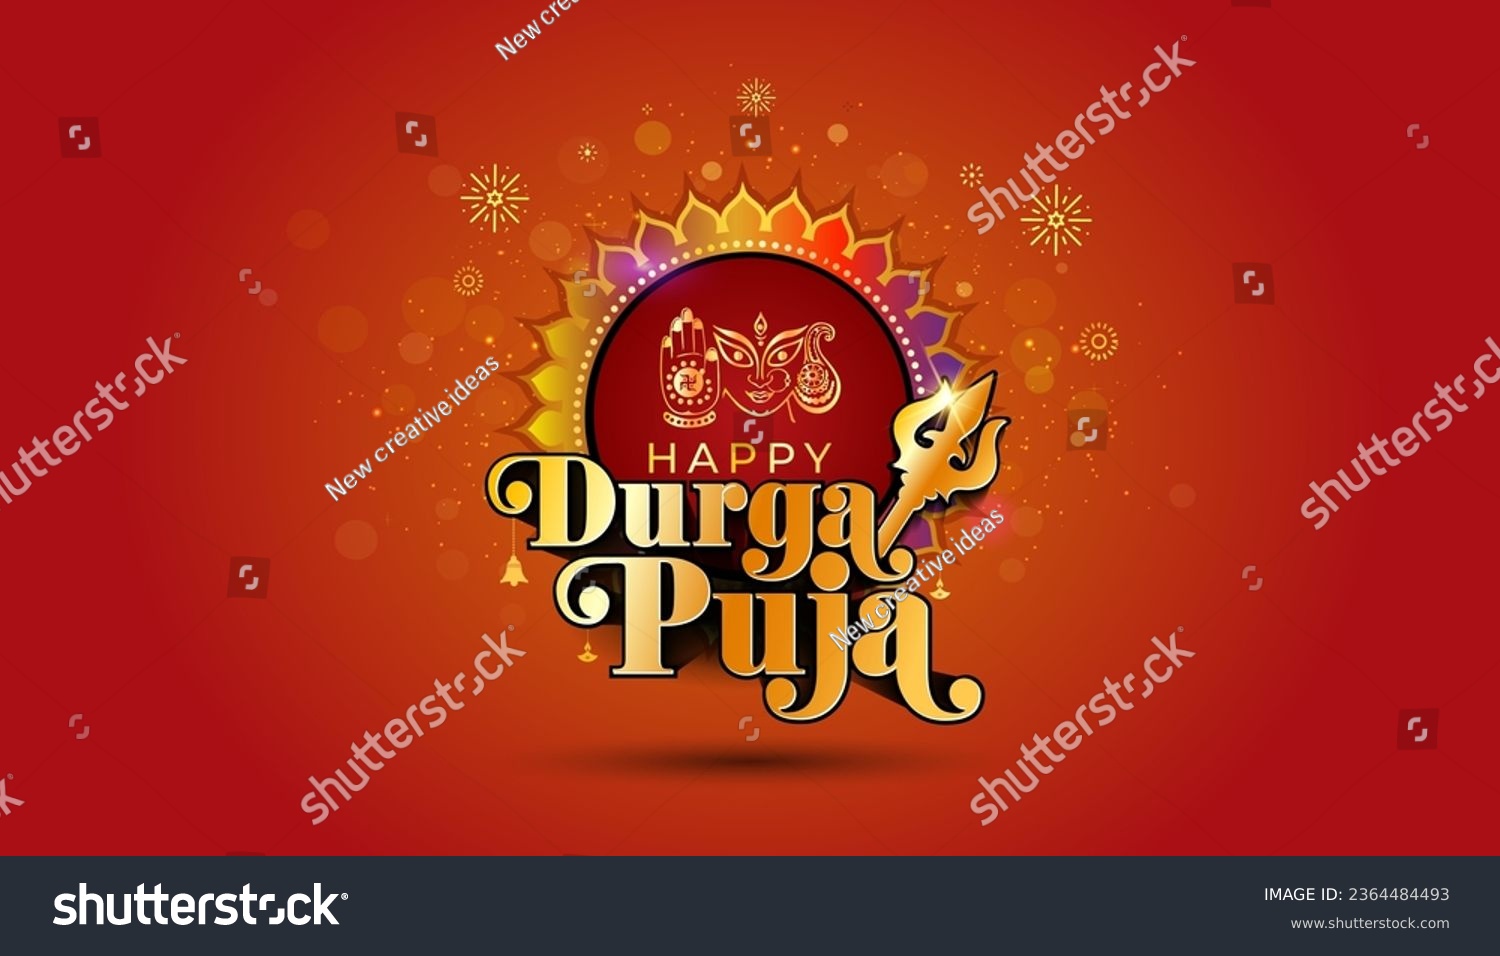 SVG of Durga Puja. Indian hindu navratri Traditional Festival Vector illustration. 3D text Happy Durga puja with golden floral on red festive background. svg